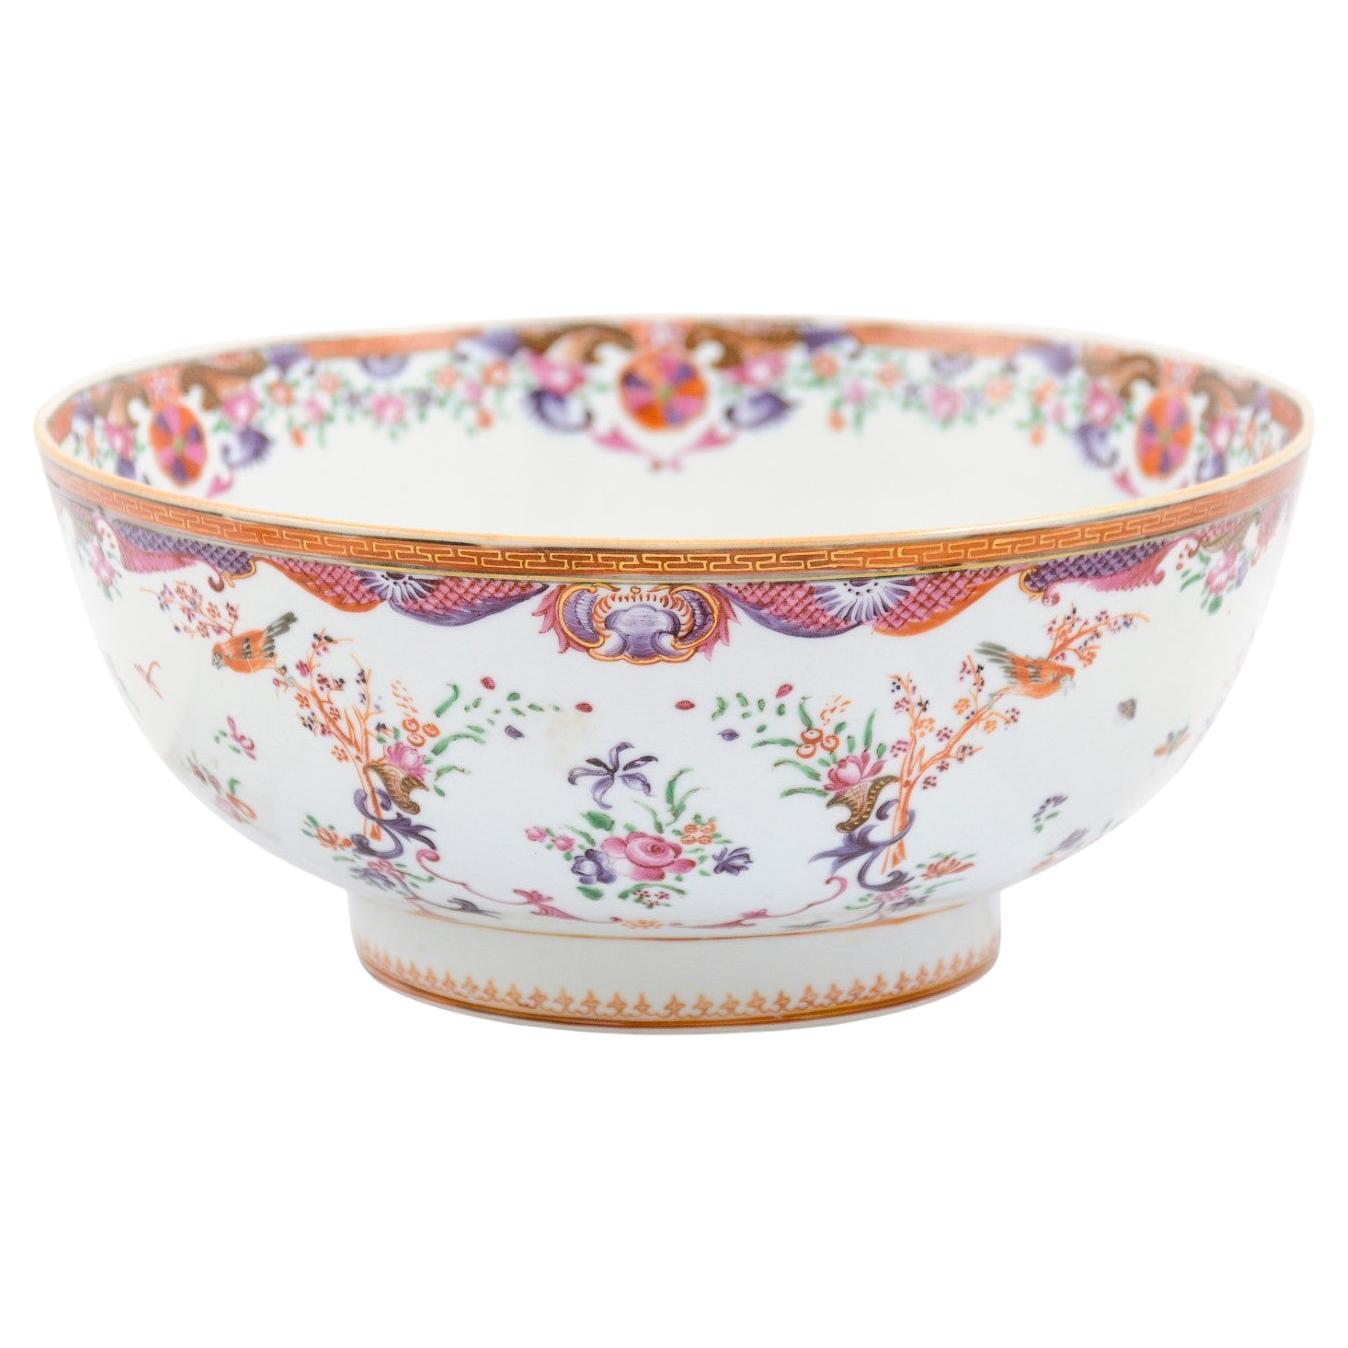 Famille Rose Bowl with Bird & Butterfly Decoration, Chinese Export ca. 1780